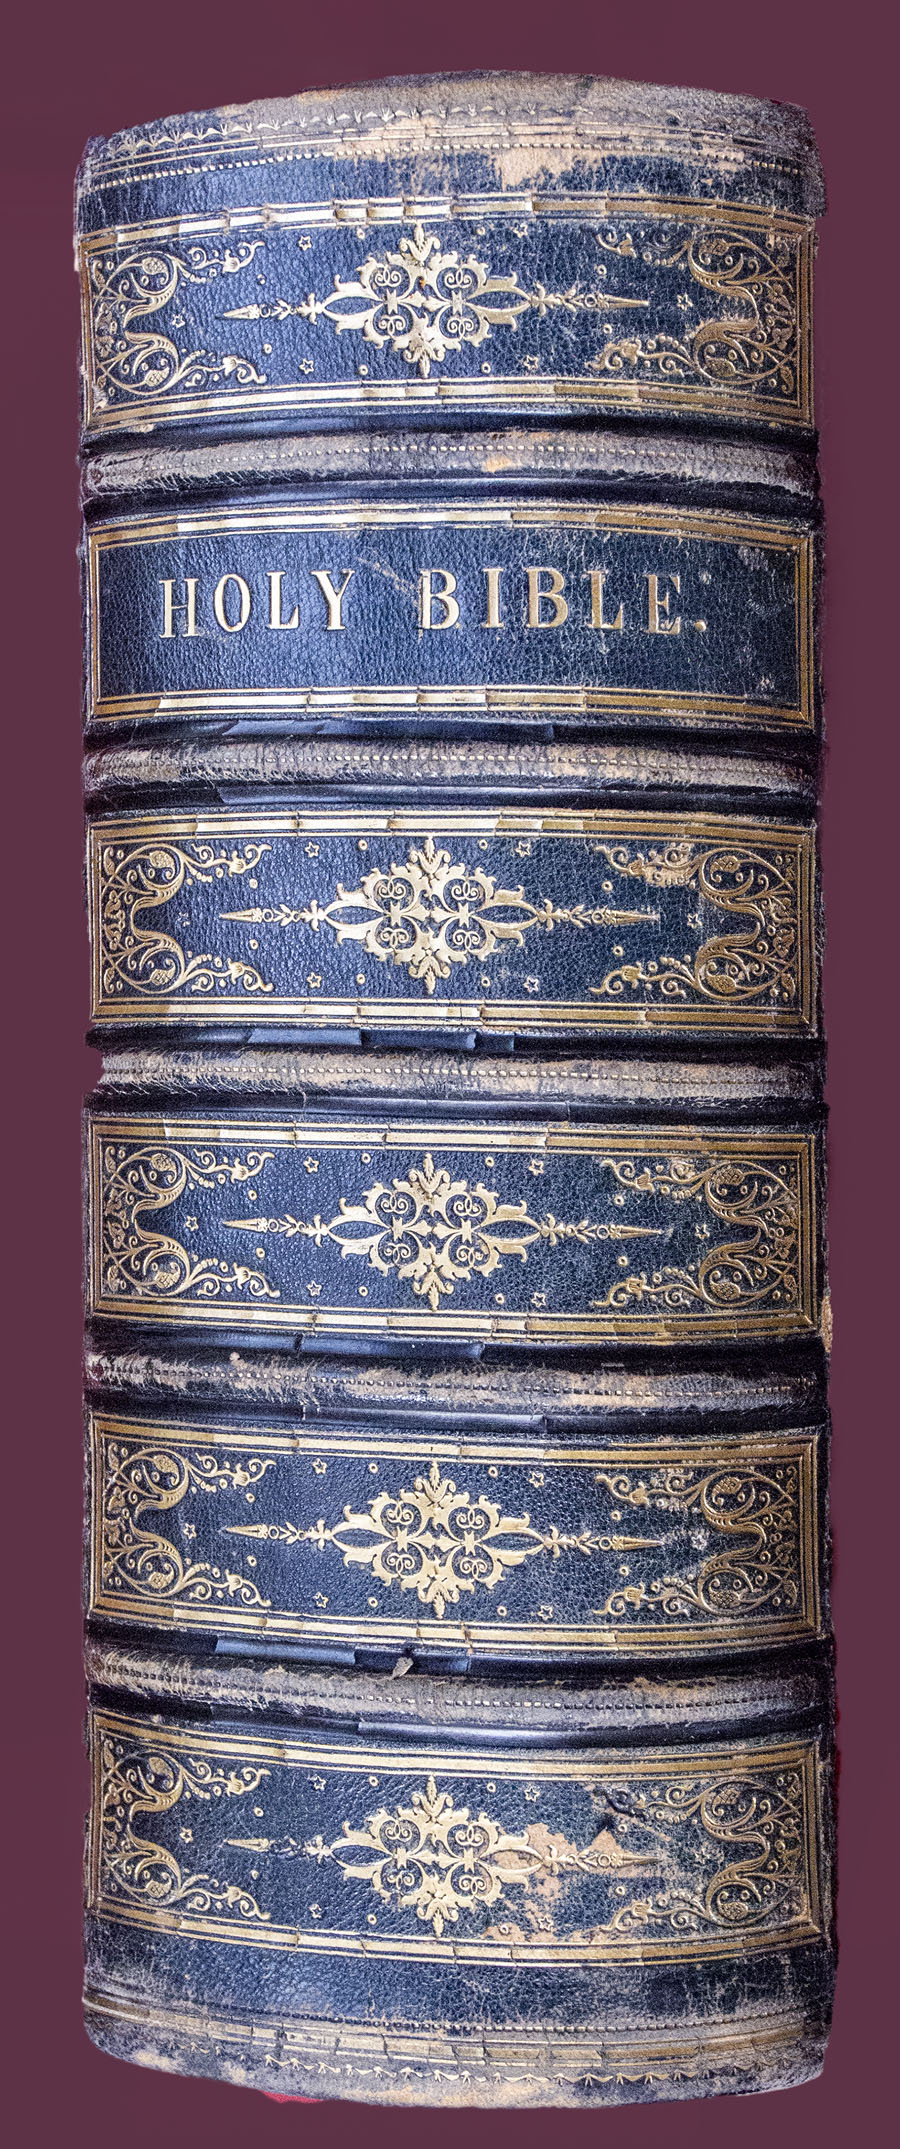 Authorised version of Holy Bible, showing the Spine